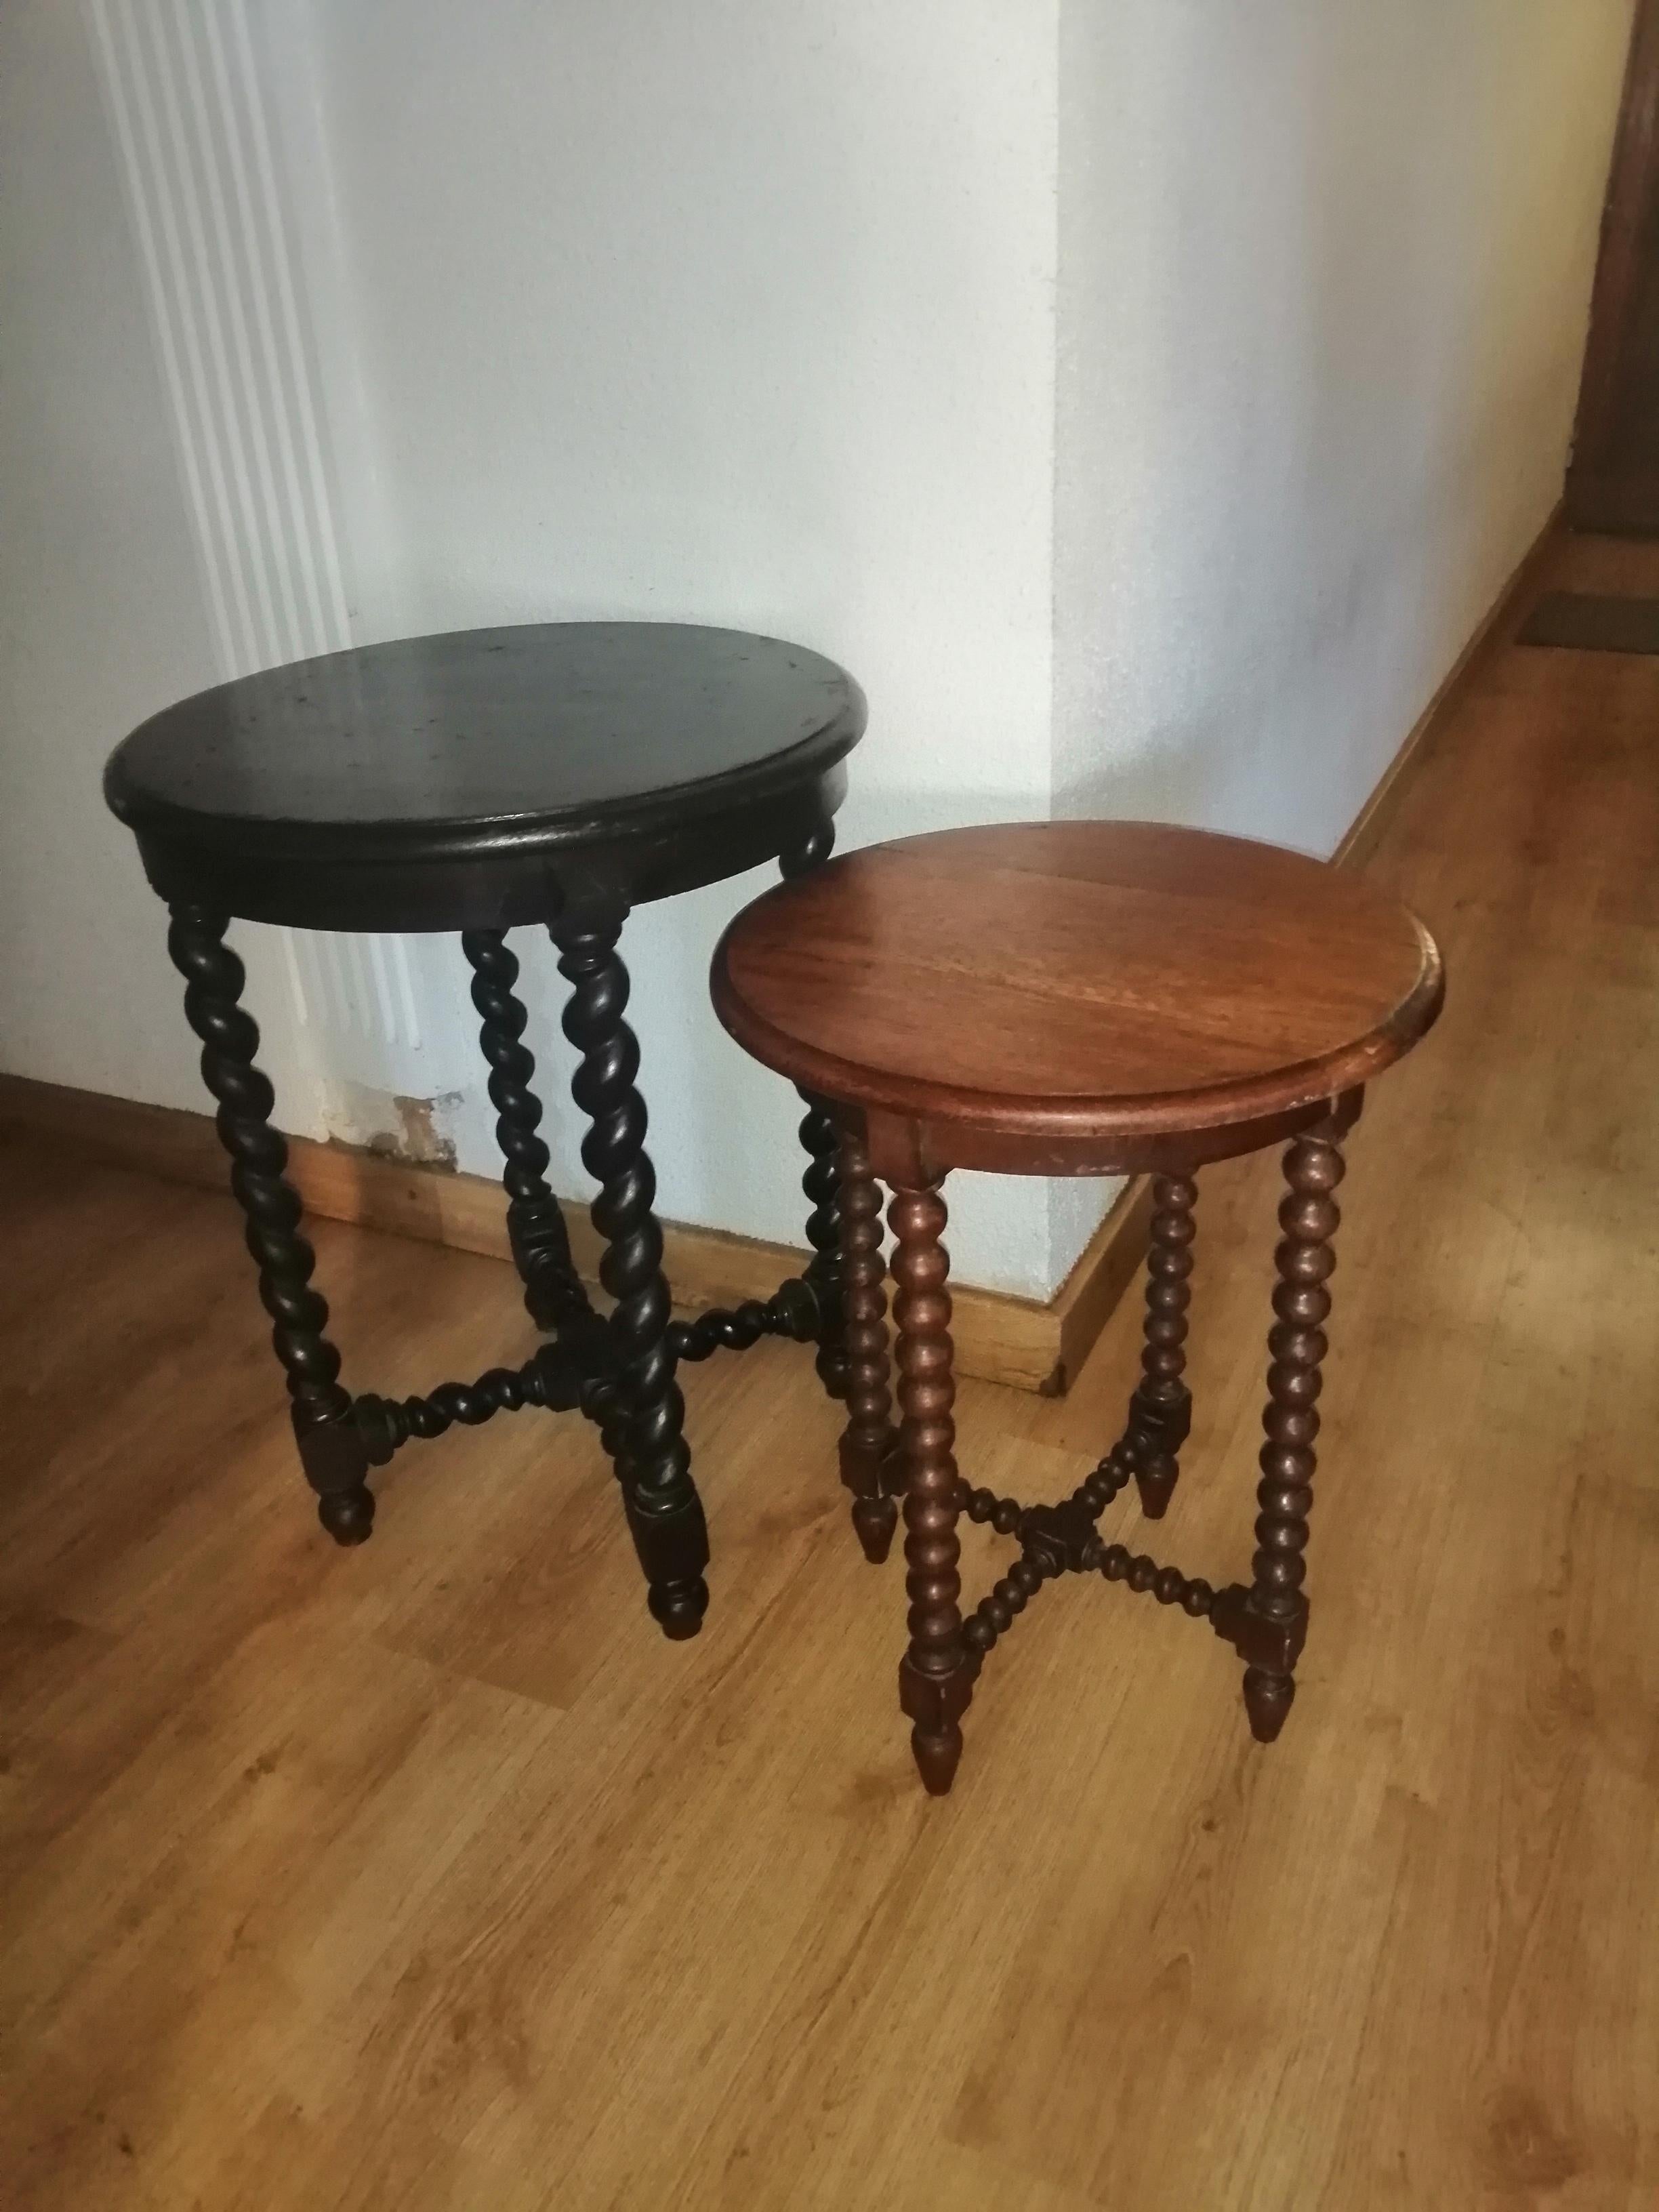 19th Century Antique Round Side Table Bobbin Turned Legs